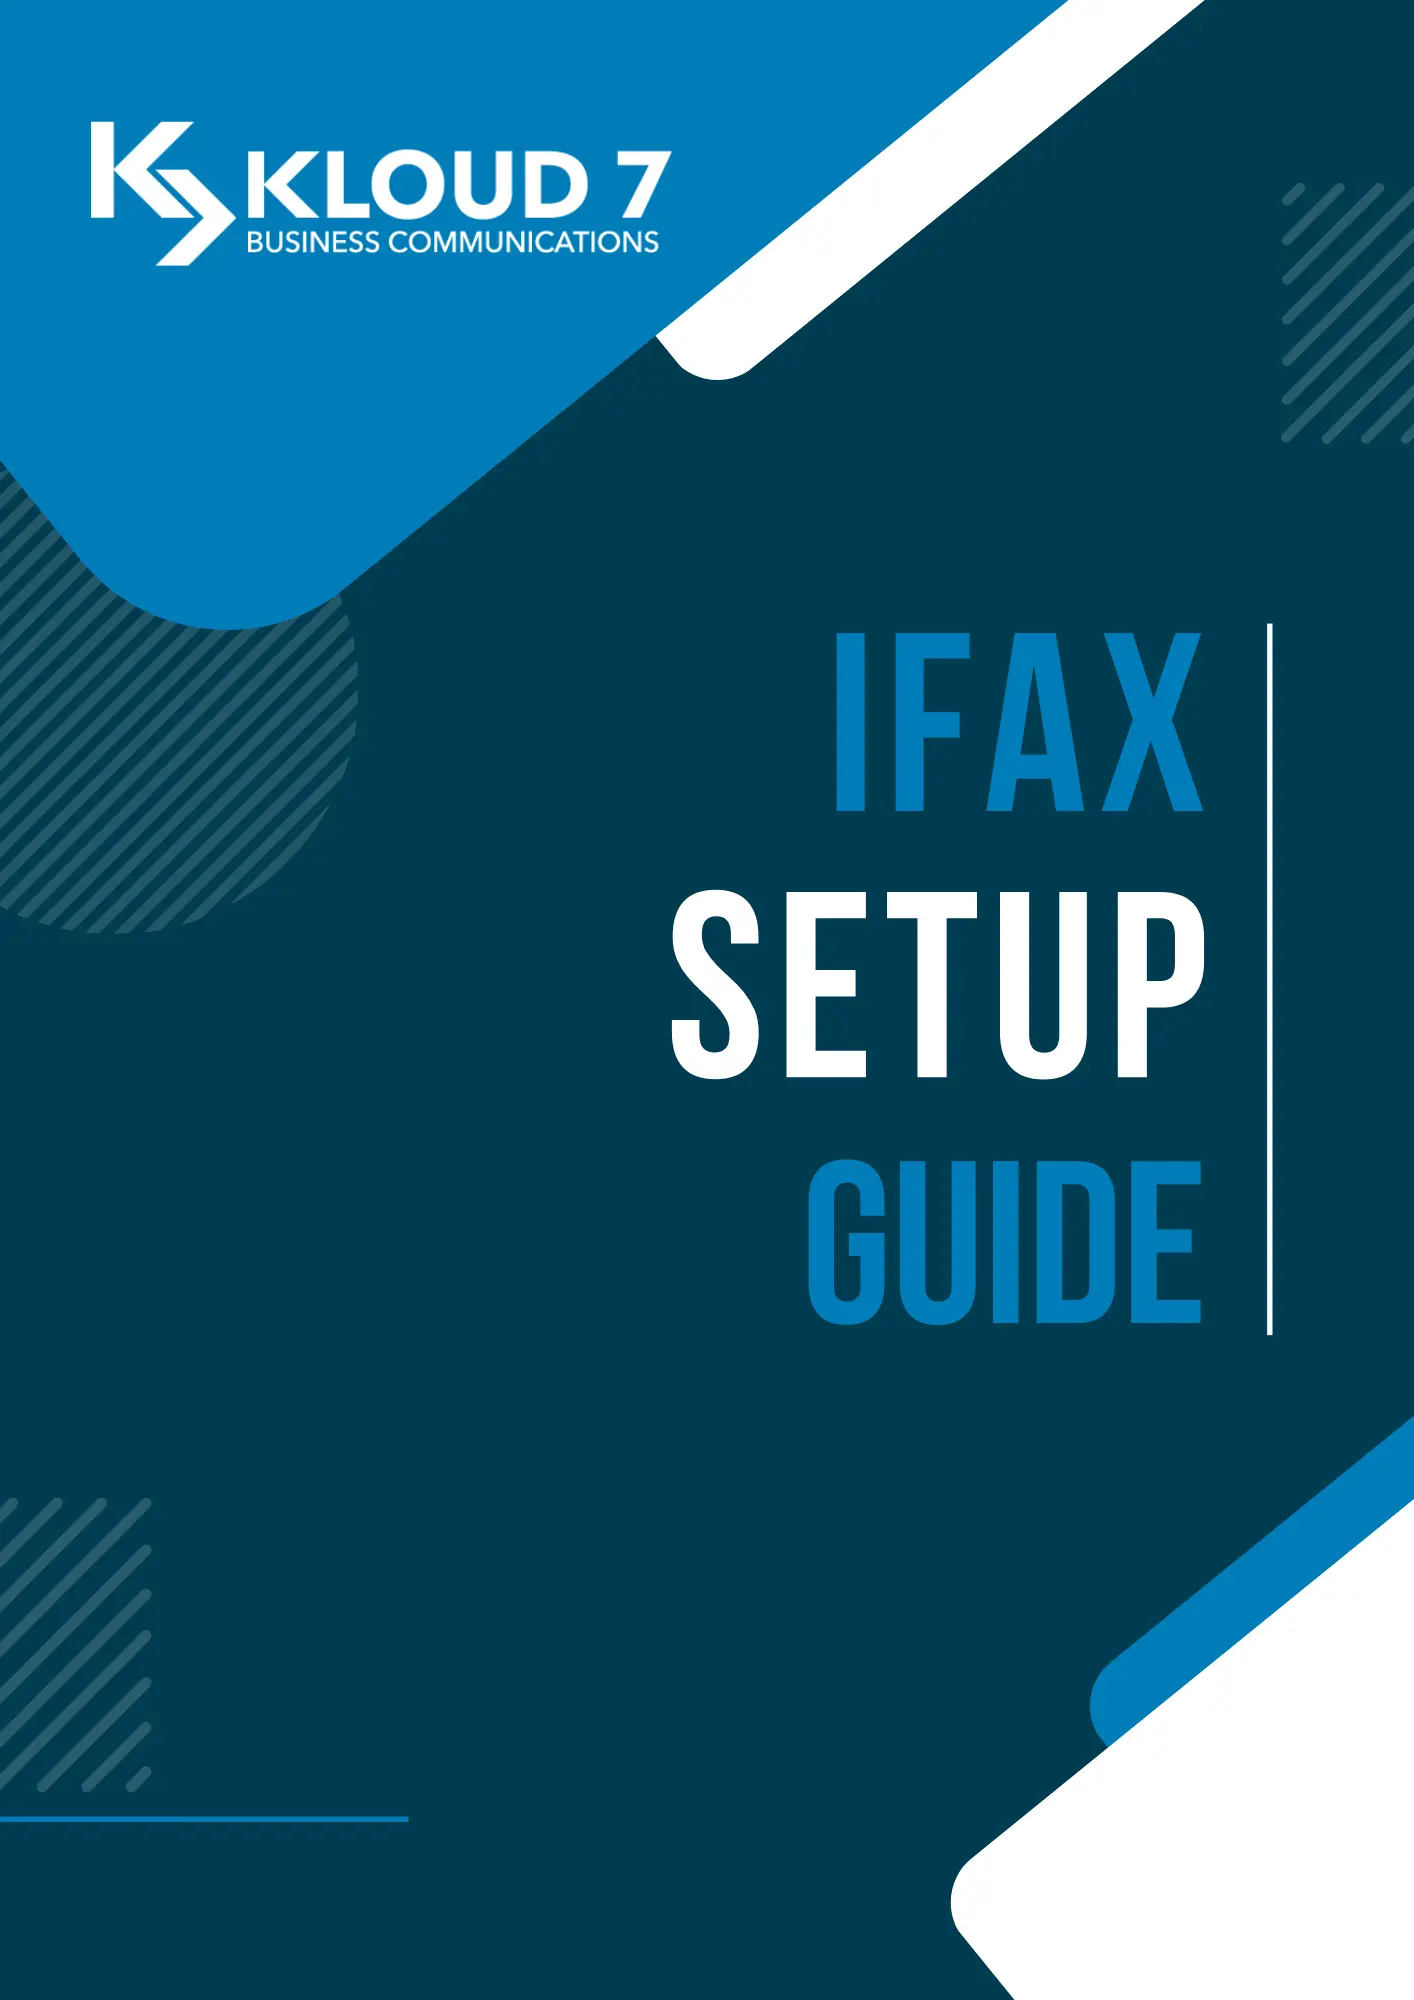 The comprehensive kloud 7 iFax setup guide to get you started.